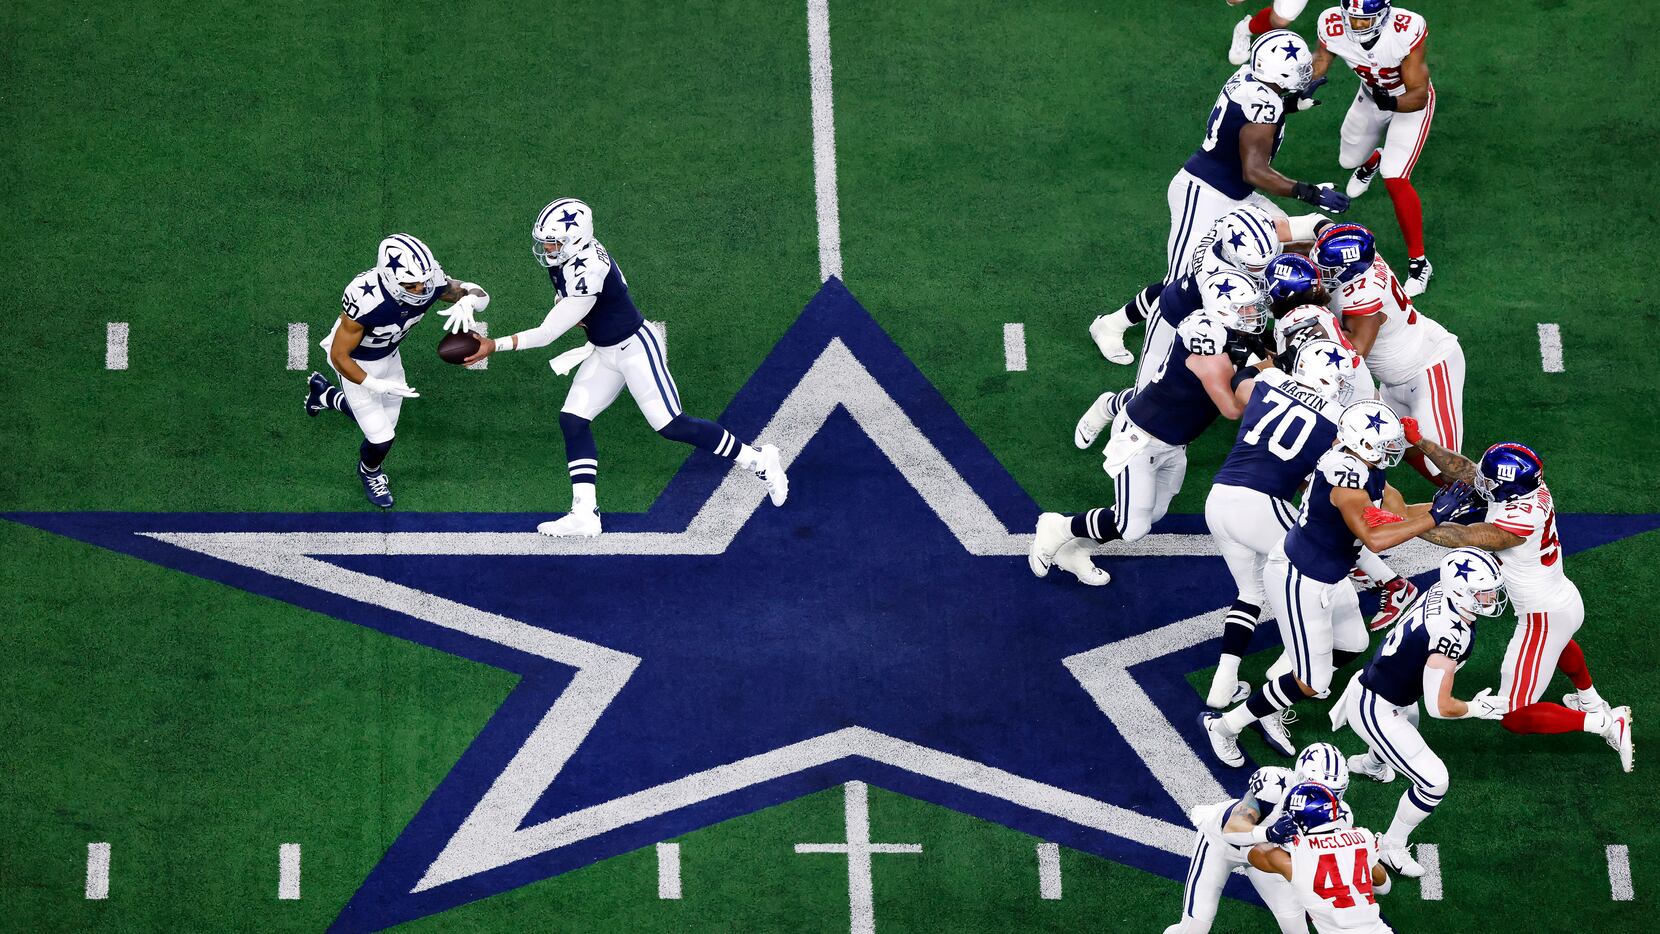 Cowboys-Giants Thanksgiving match made history as the most-watched